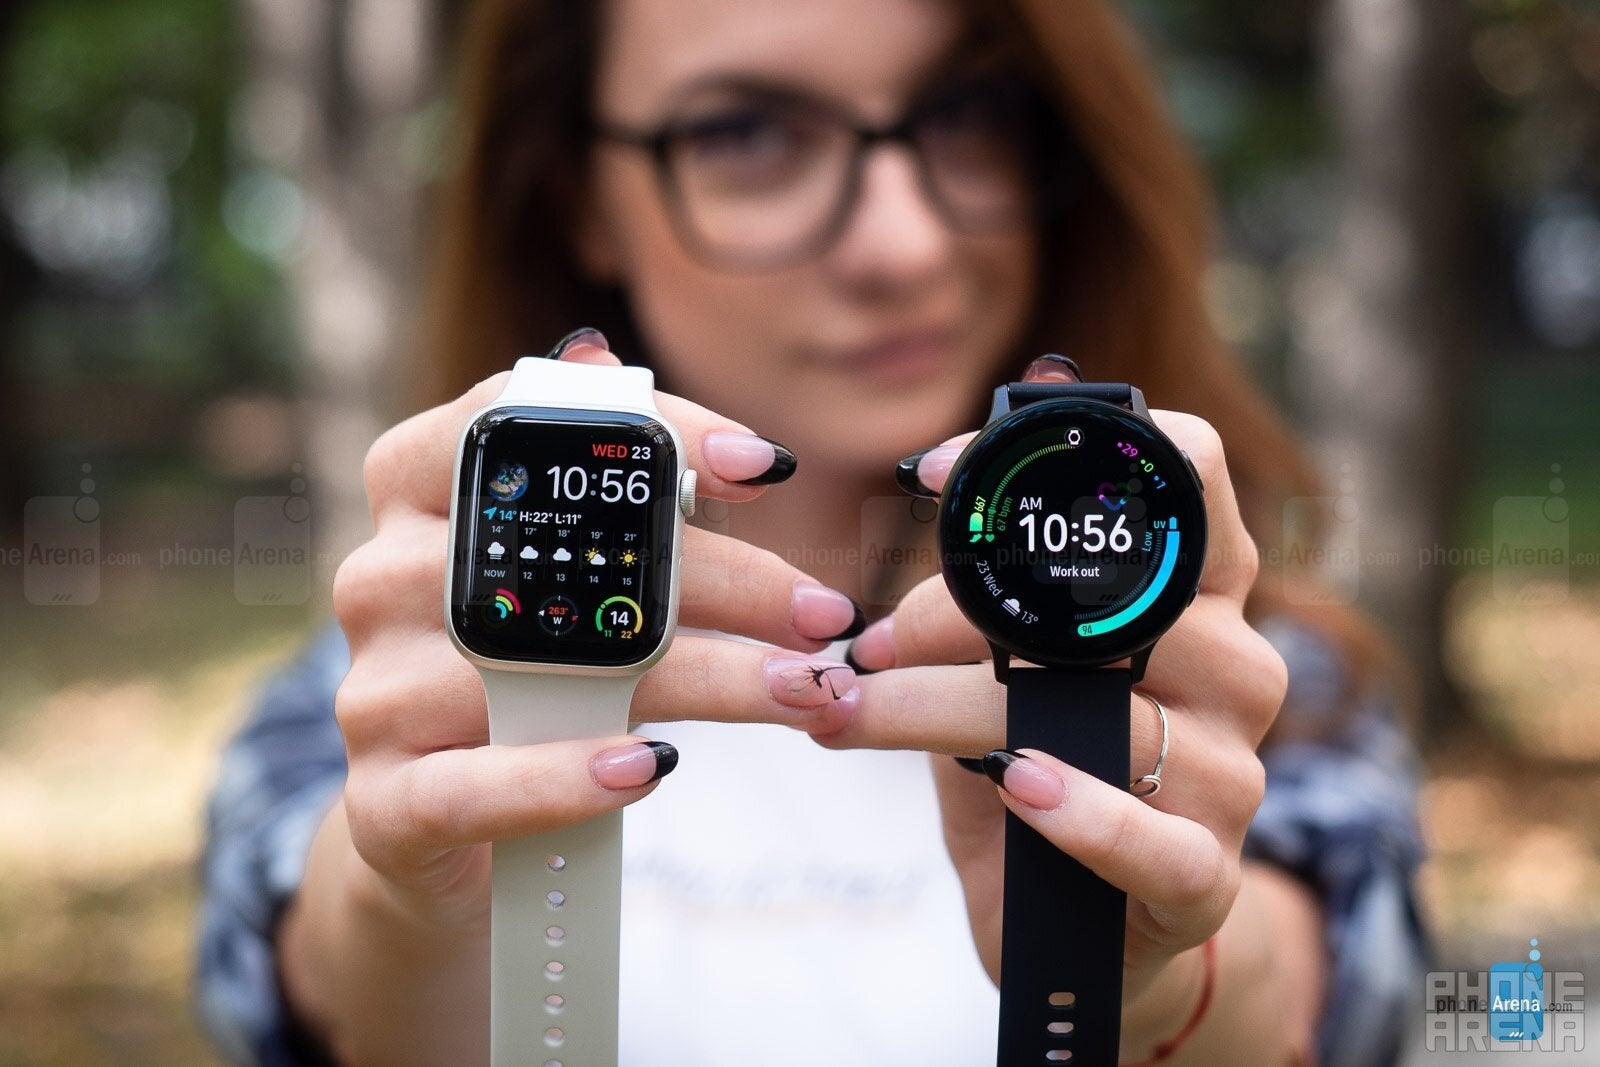 The prettier smartwatch is not necessarily the better one - The Apple Watch Series 5 is nothing special, but it still deserves all the attention in the world